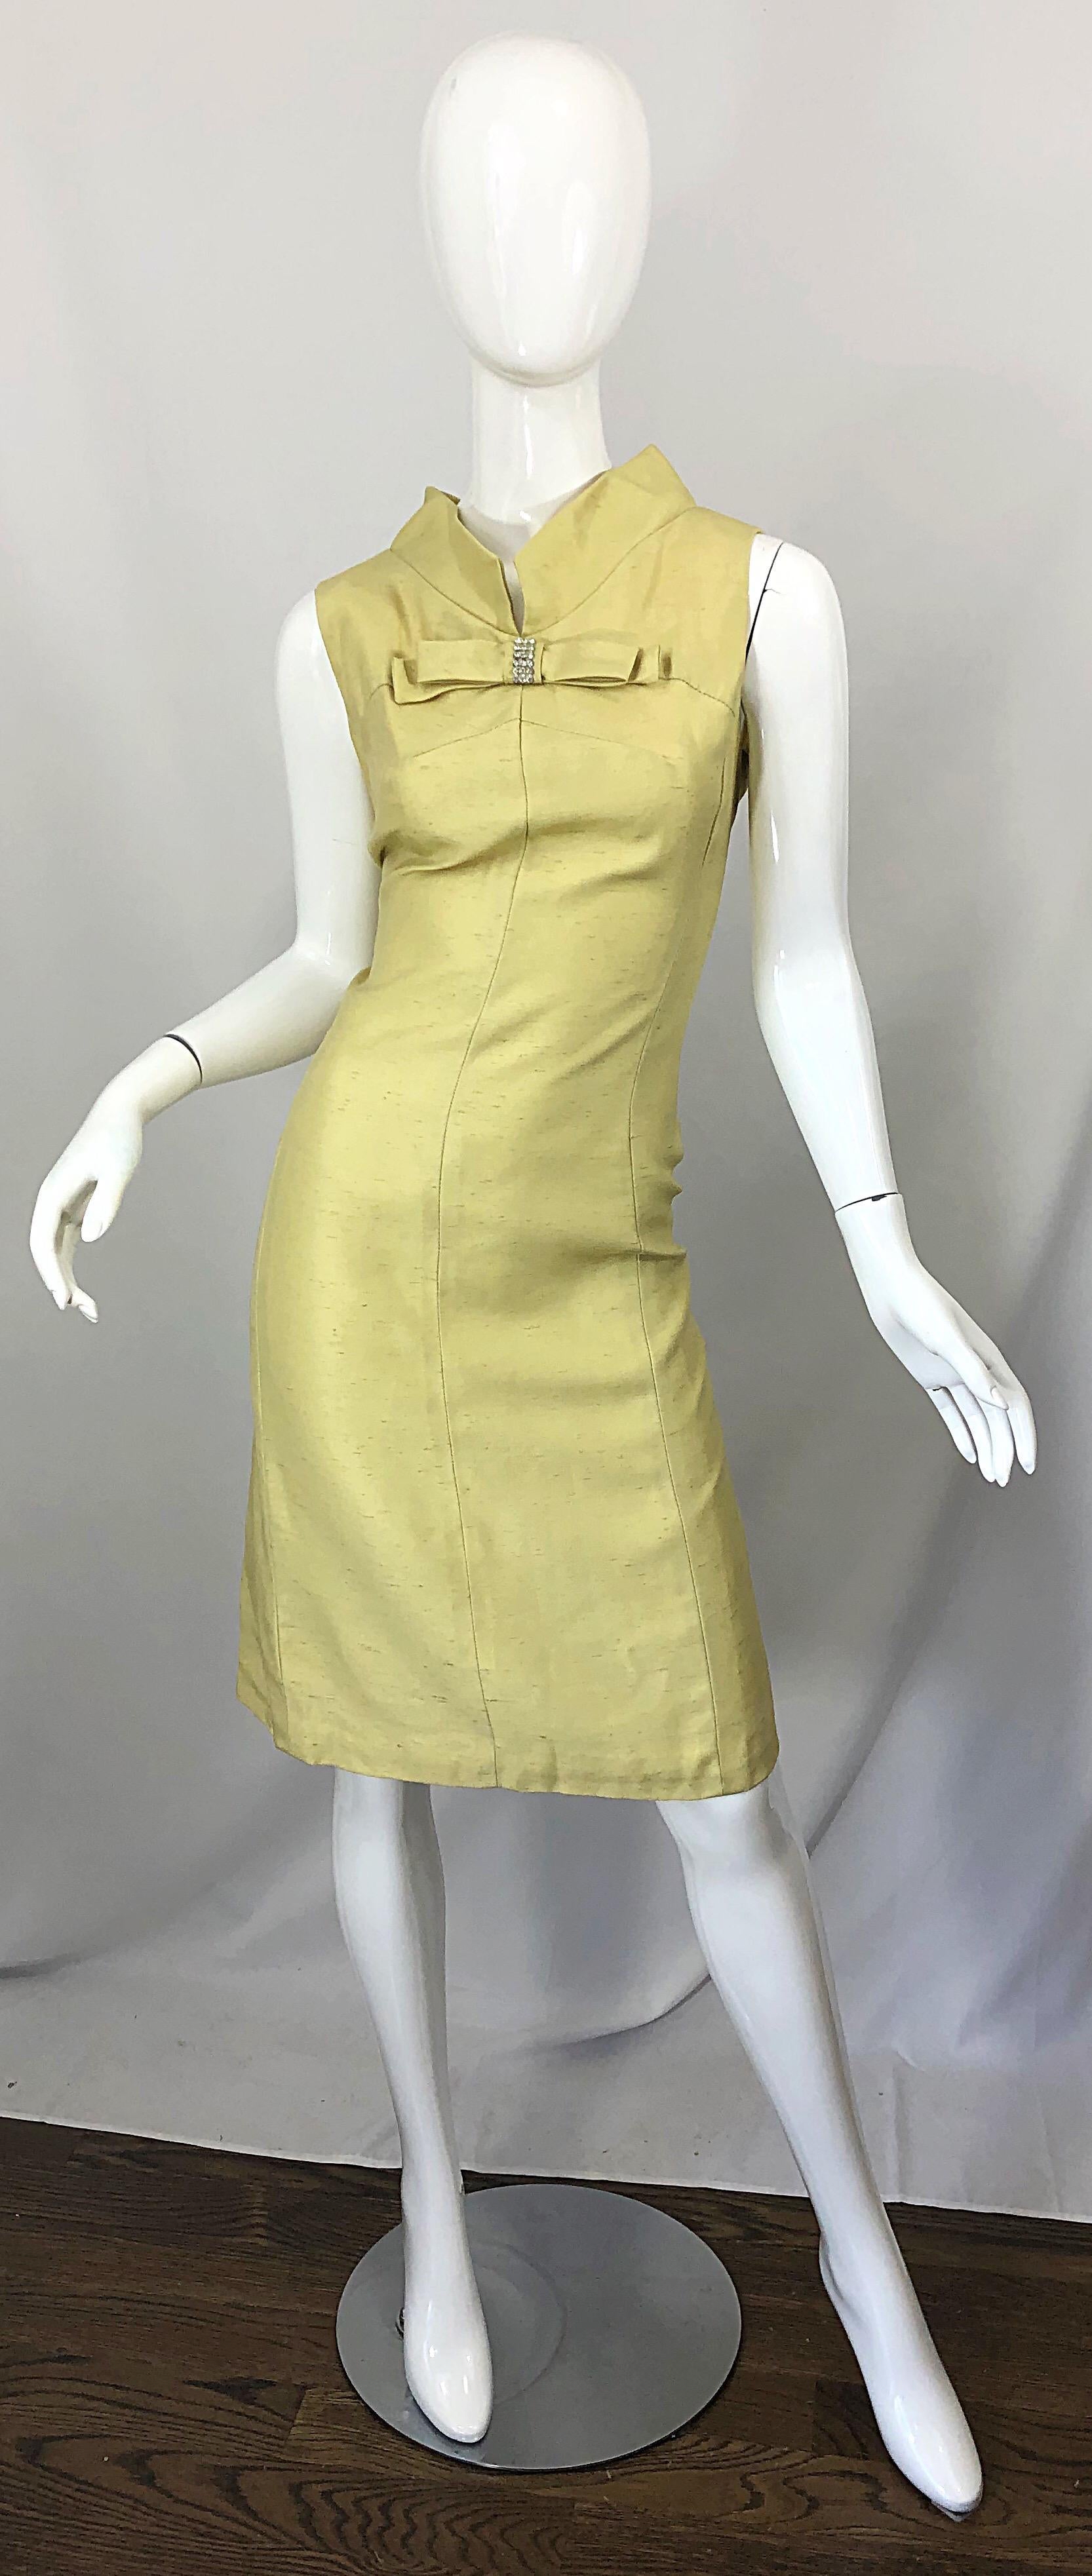 Chic 1960s I MAGNIN pale yellow silk shantung 60s shift dress! Features a bow at center collar encrusted with rhinestones. Tailored bodice with a forgiving shift skirt. Full metal zipper up the back with hook-and-eye closures. Very well made with